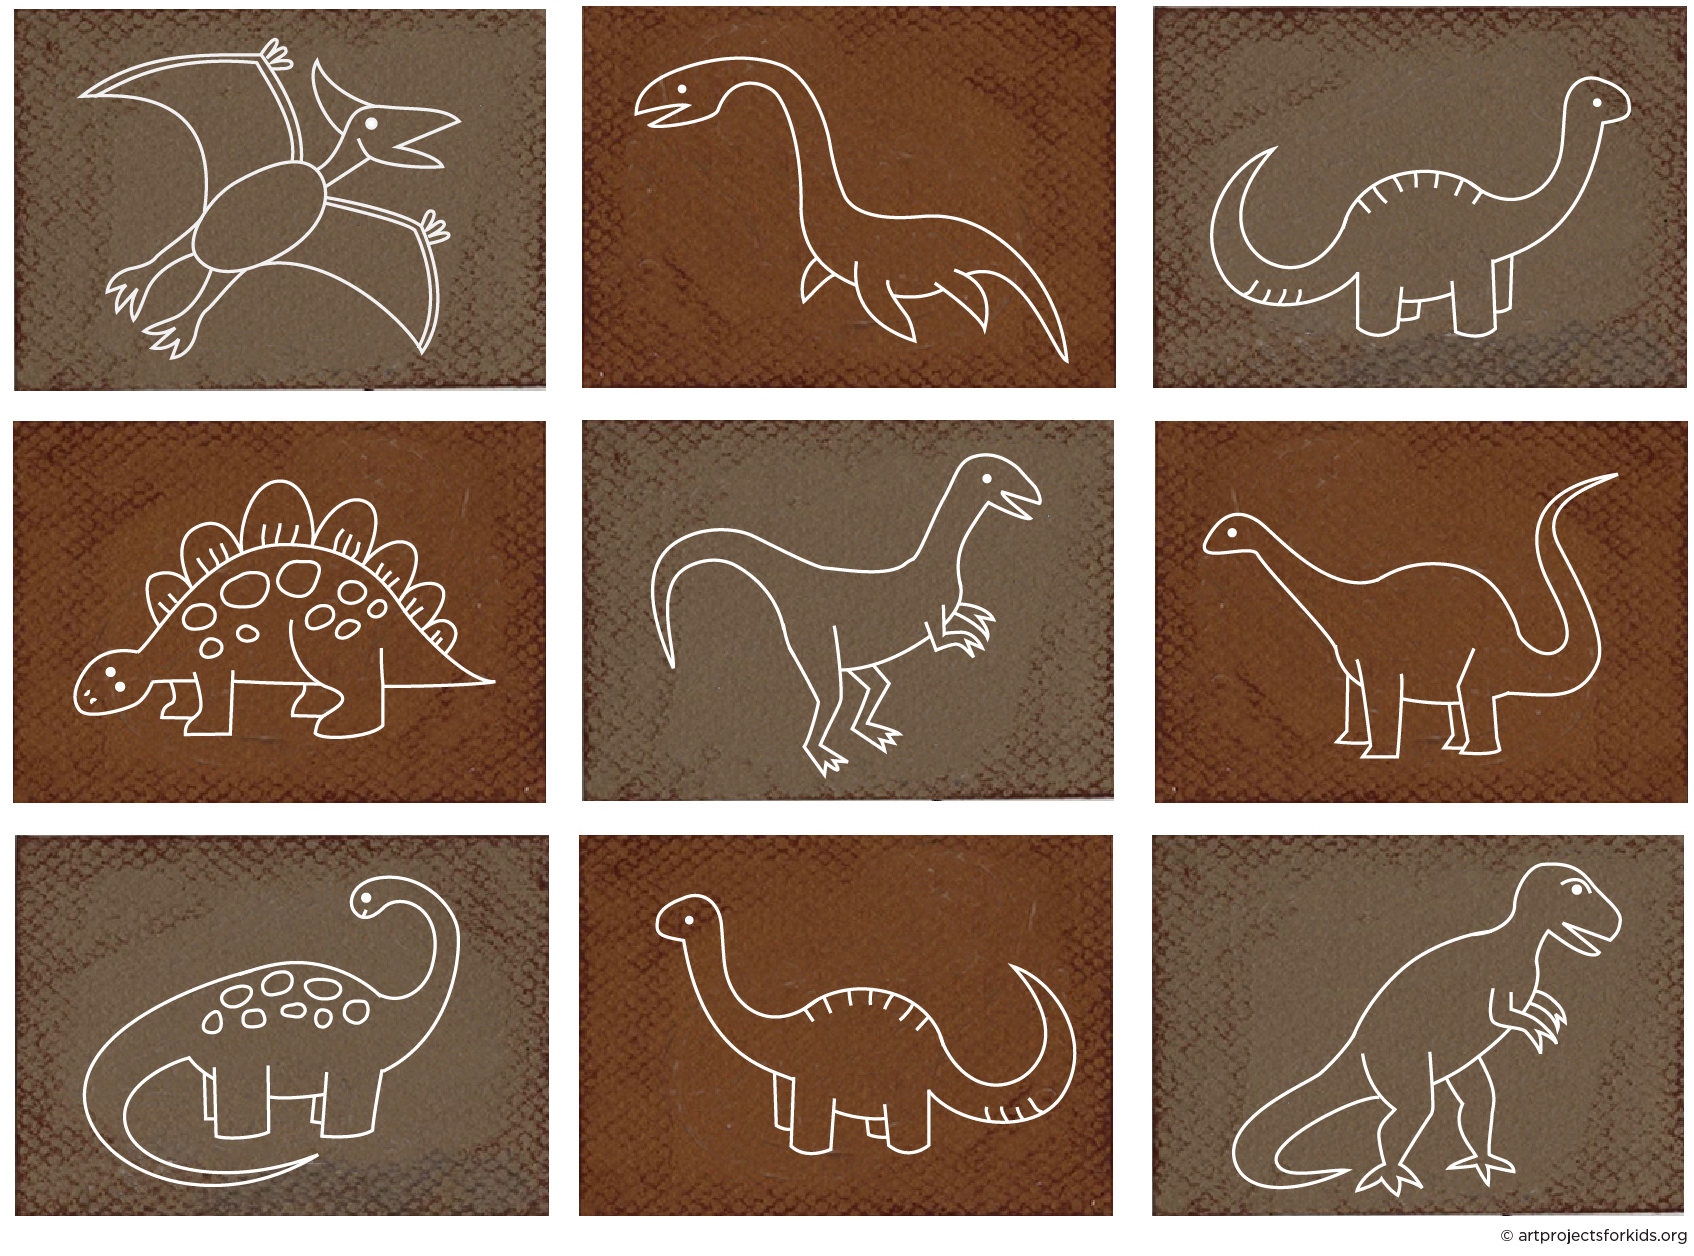 How To Draw Simple Dinosaurs Art Projects For Kids To begin drawing a tyrannosaurus rex, start with the basic shapes you see. how to draw simple dinosaurs art